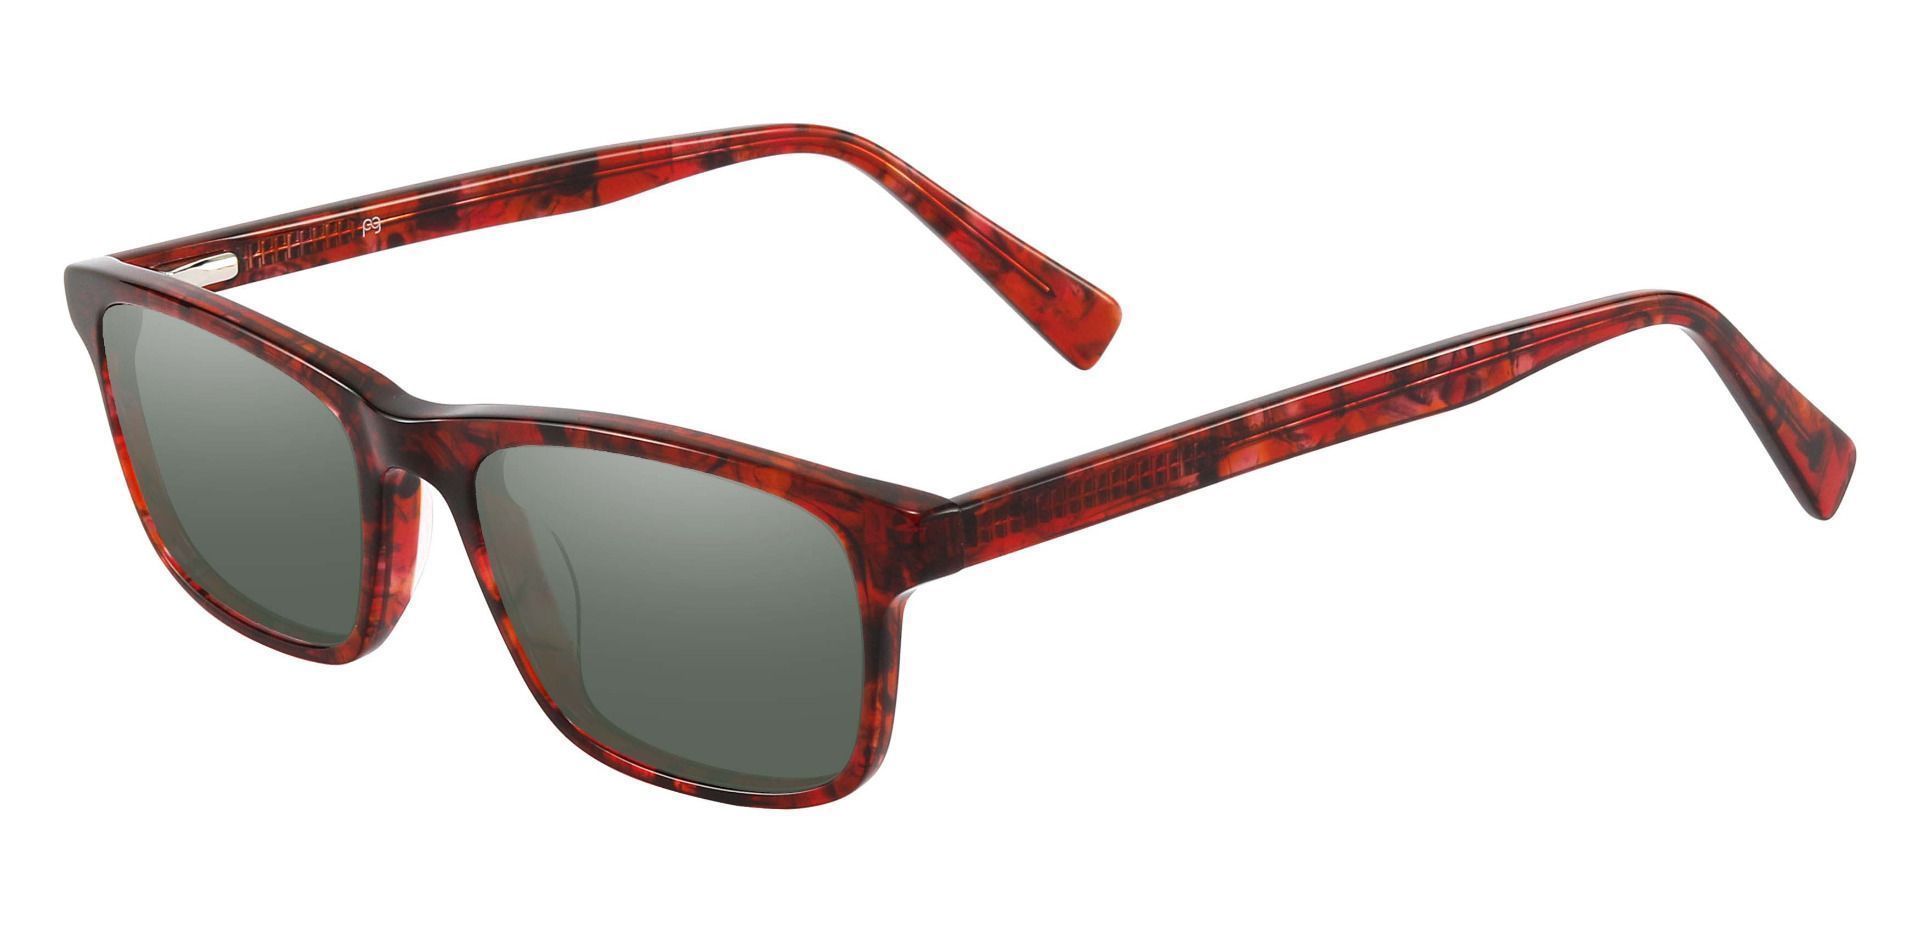 Munich Rectangle Reading Sunglasses - Red Frame With Green Lenses